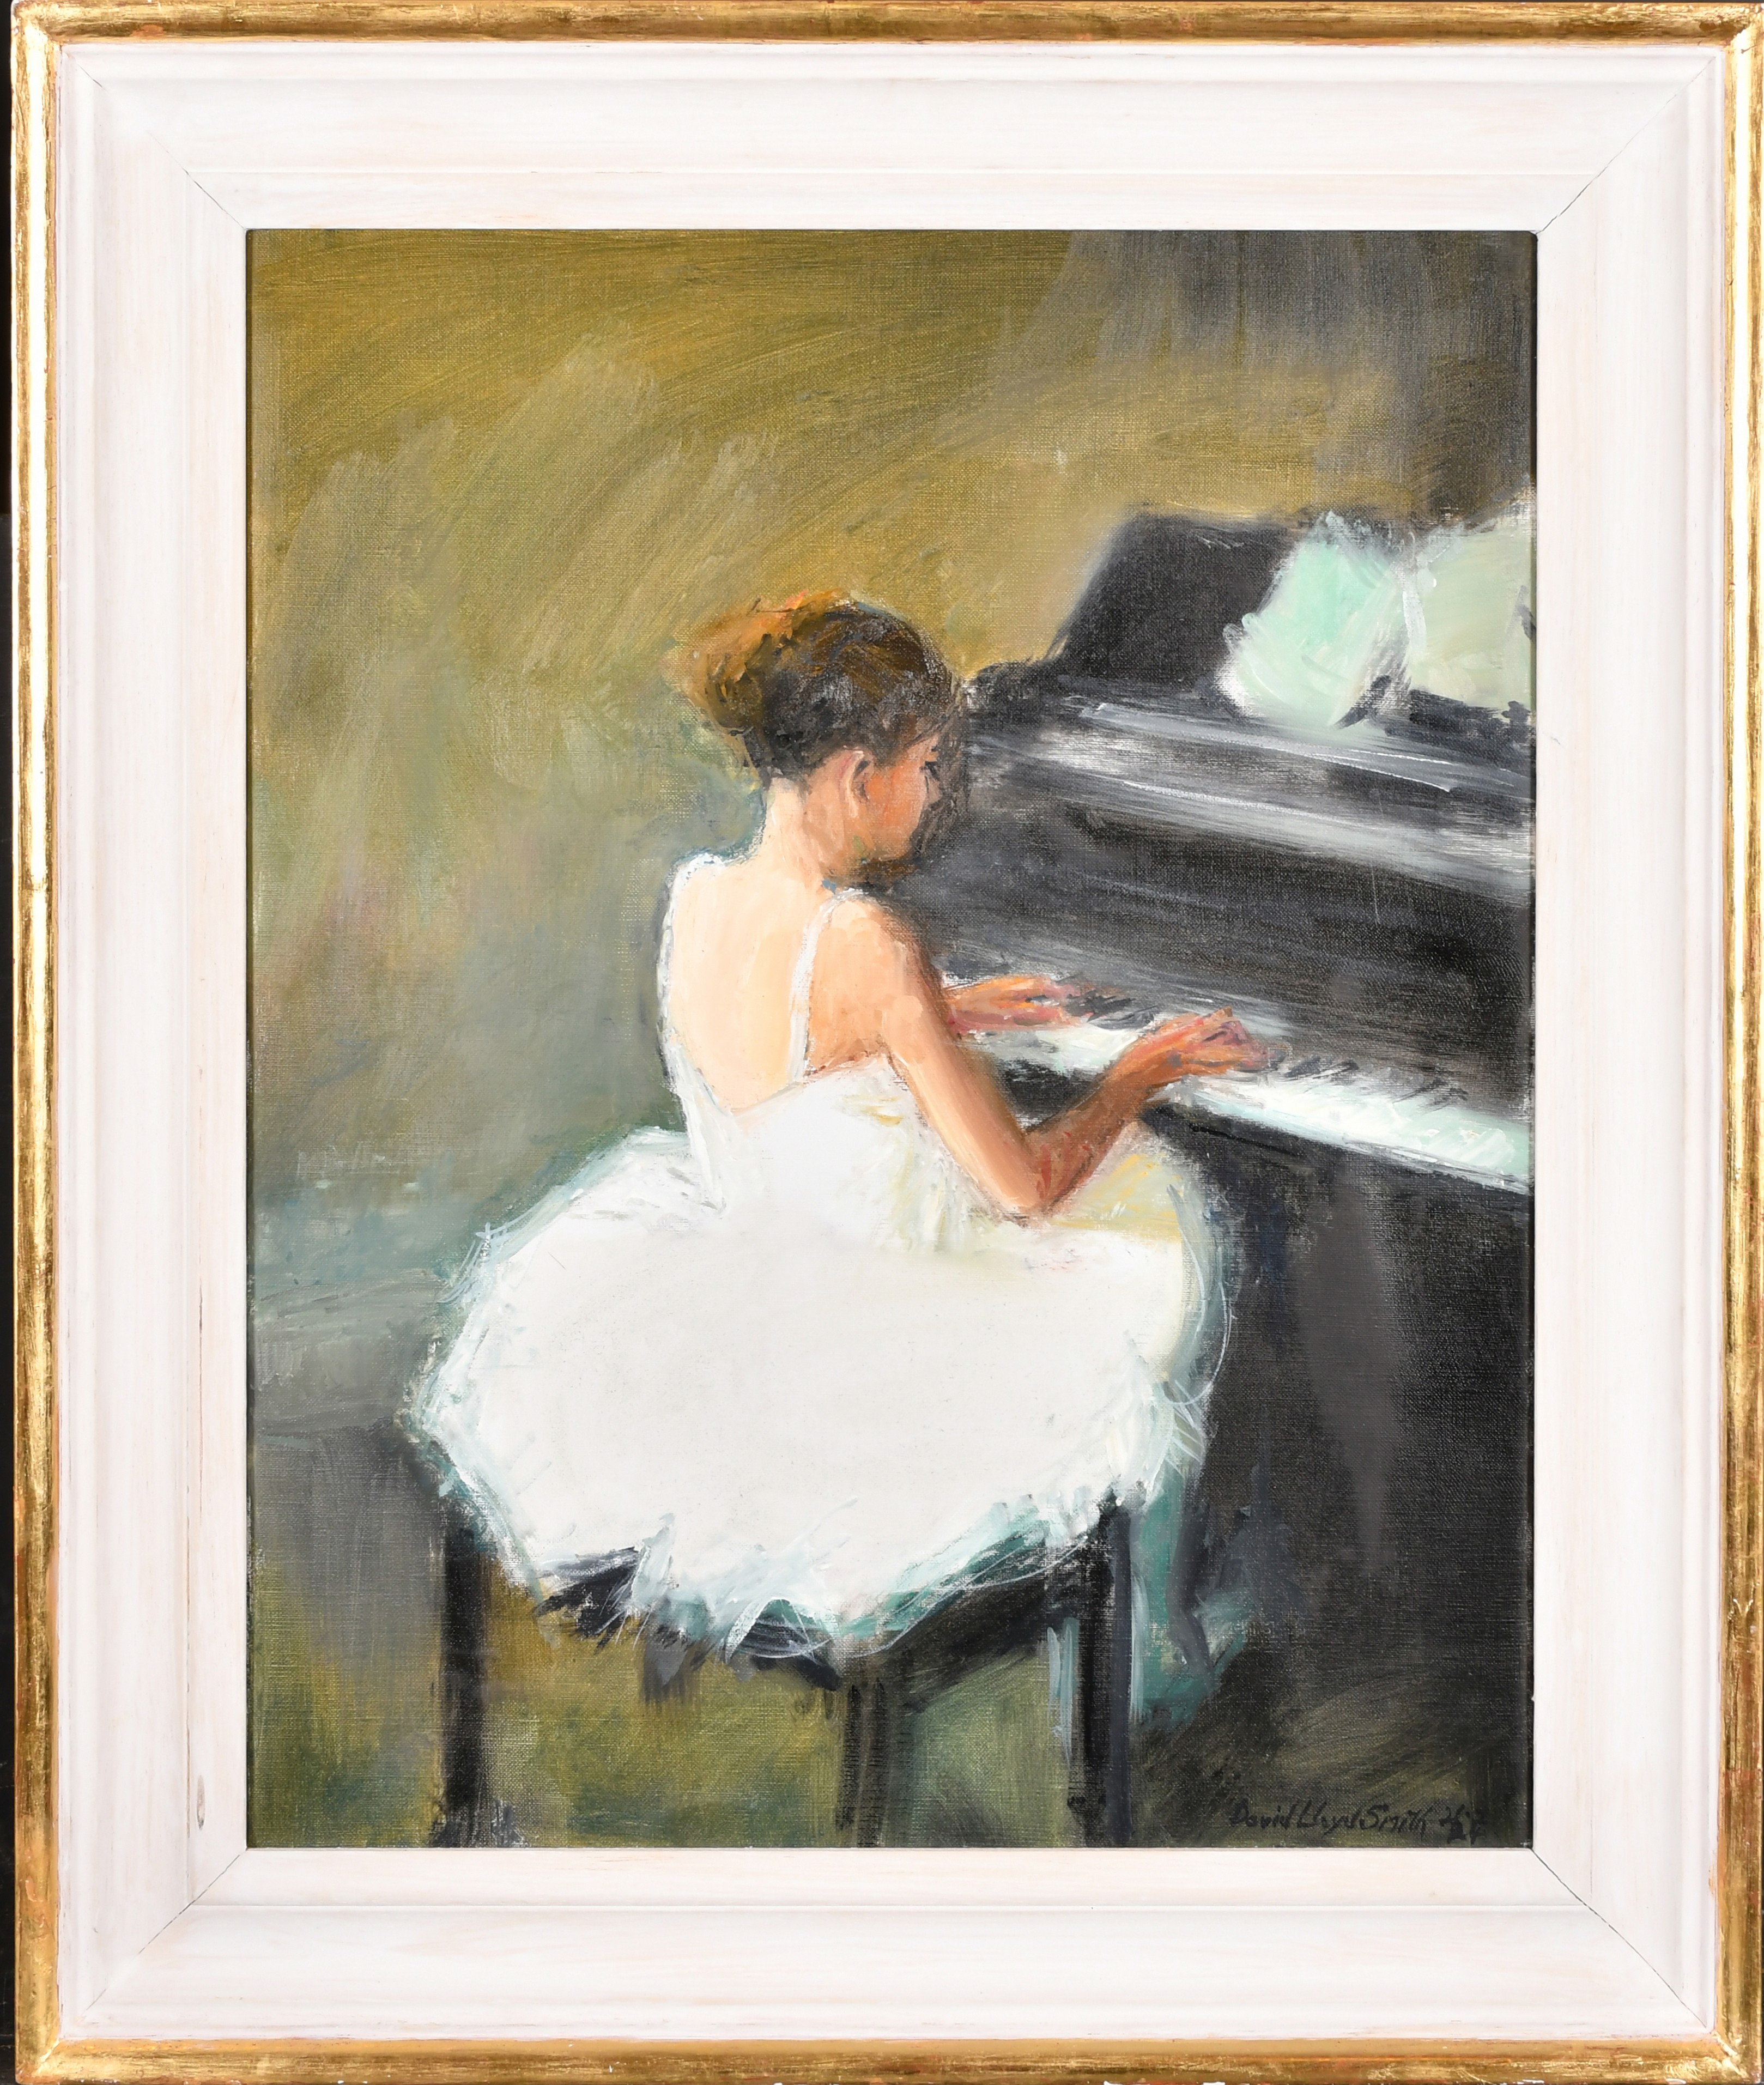 David Lloyd Smith (1944-) British. A Ballerina at a Piano, Oil on canvas, Signed and dated, 20" x - Image 2 of 4